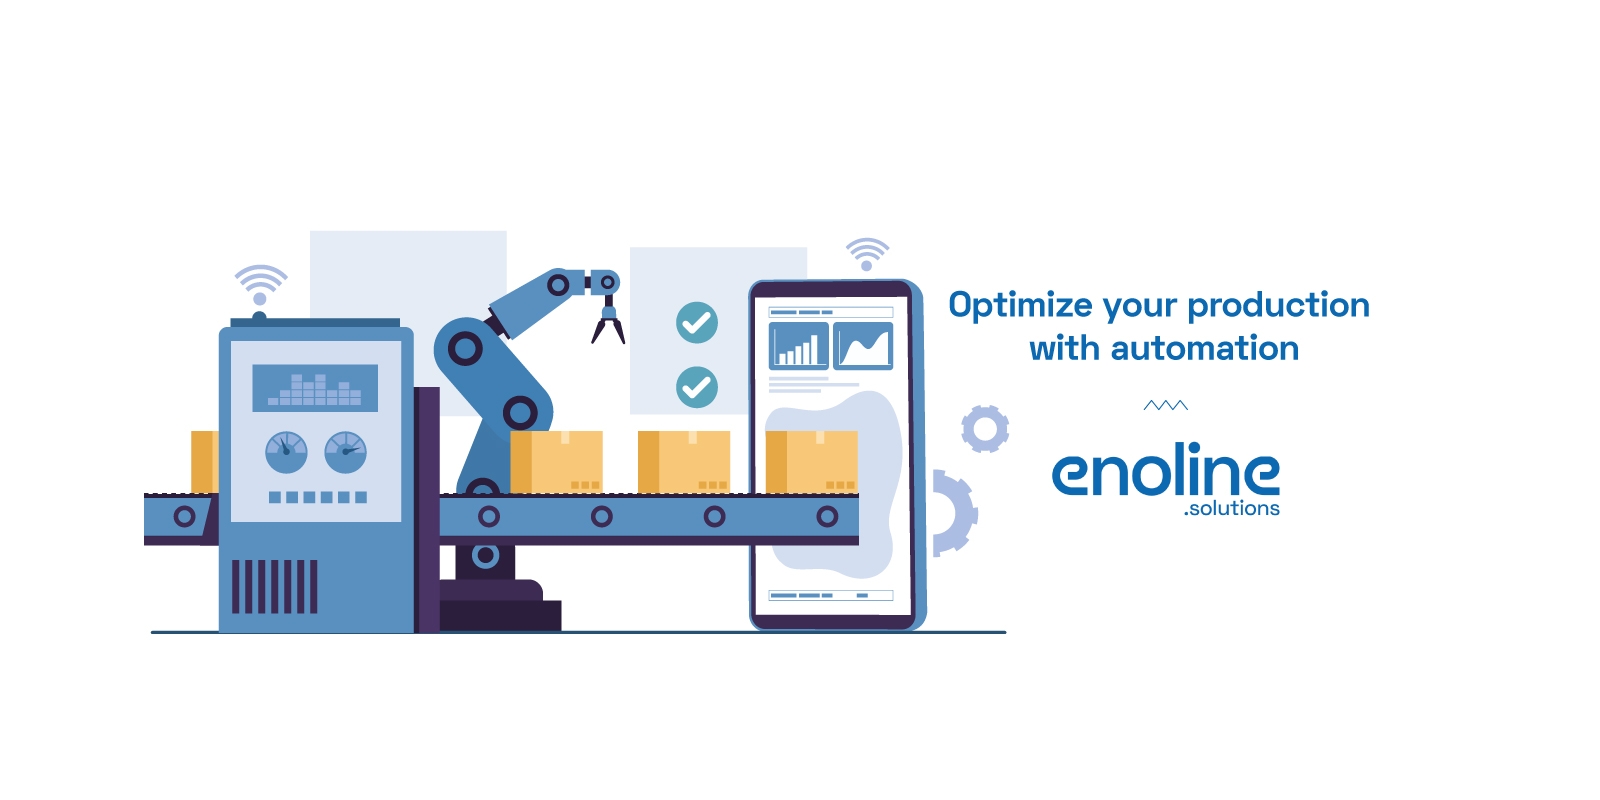 Enoline optimize your production with automation